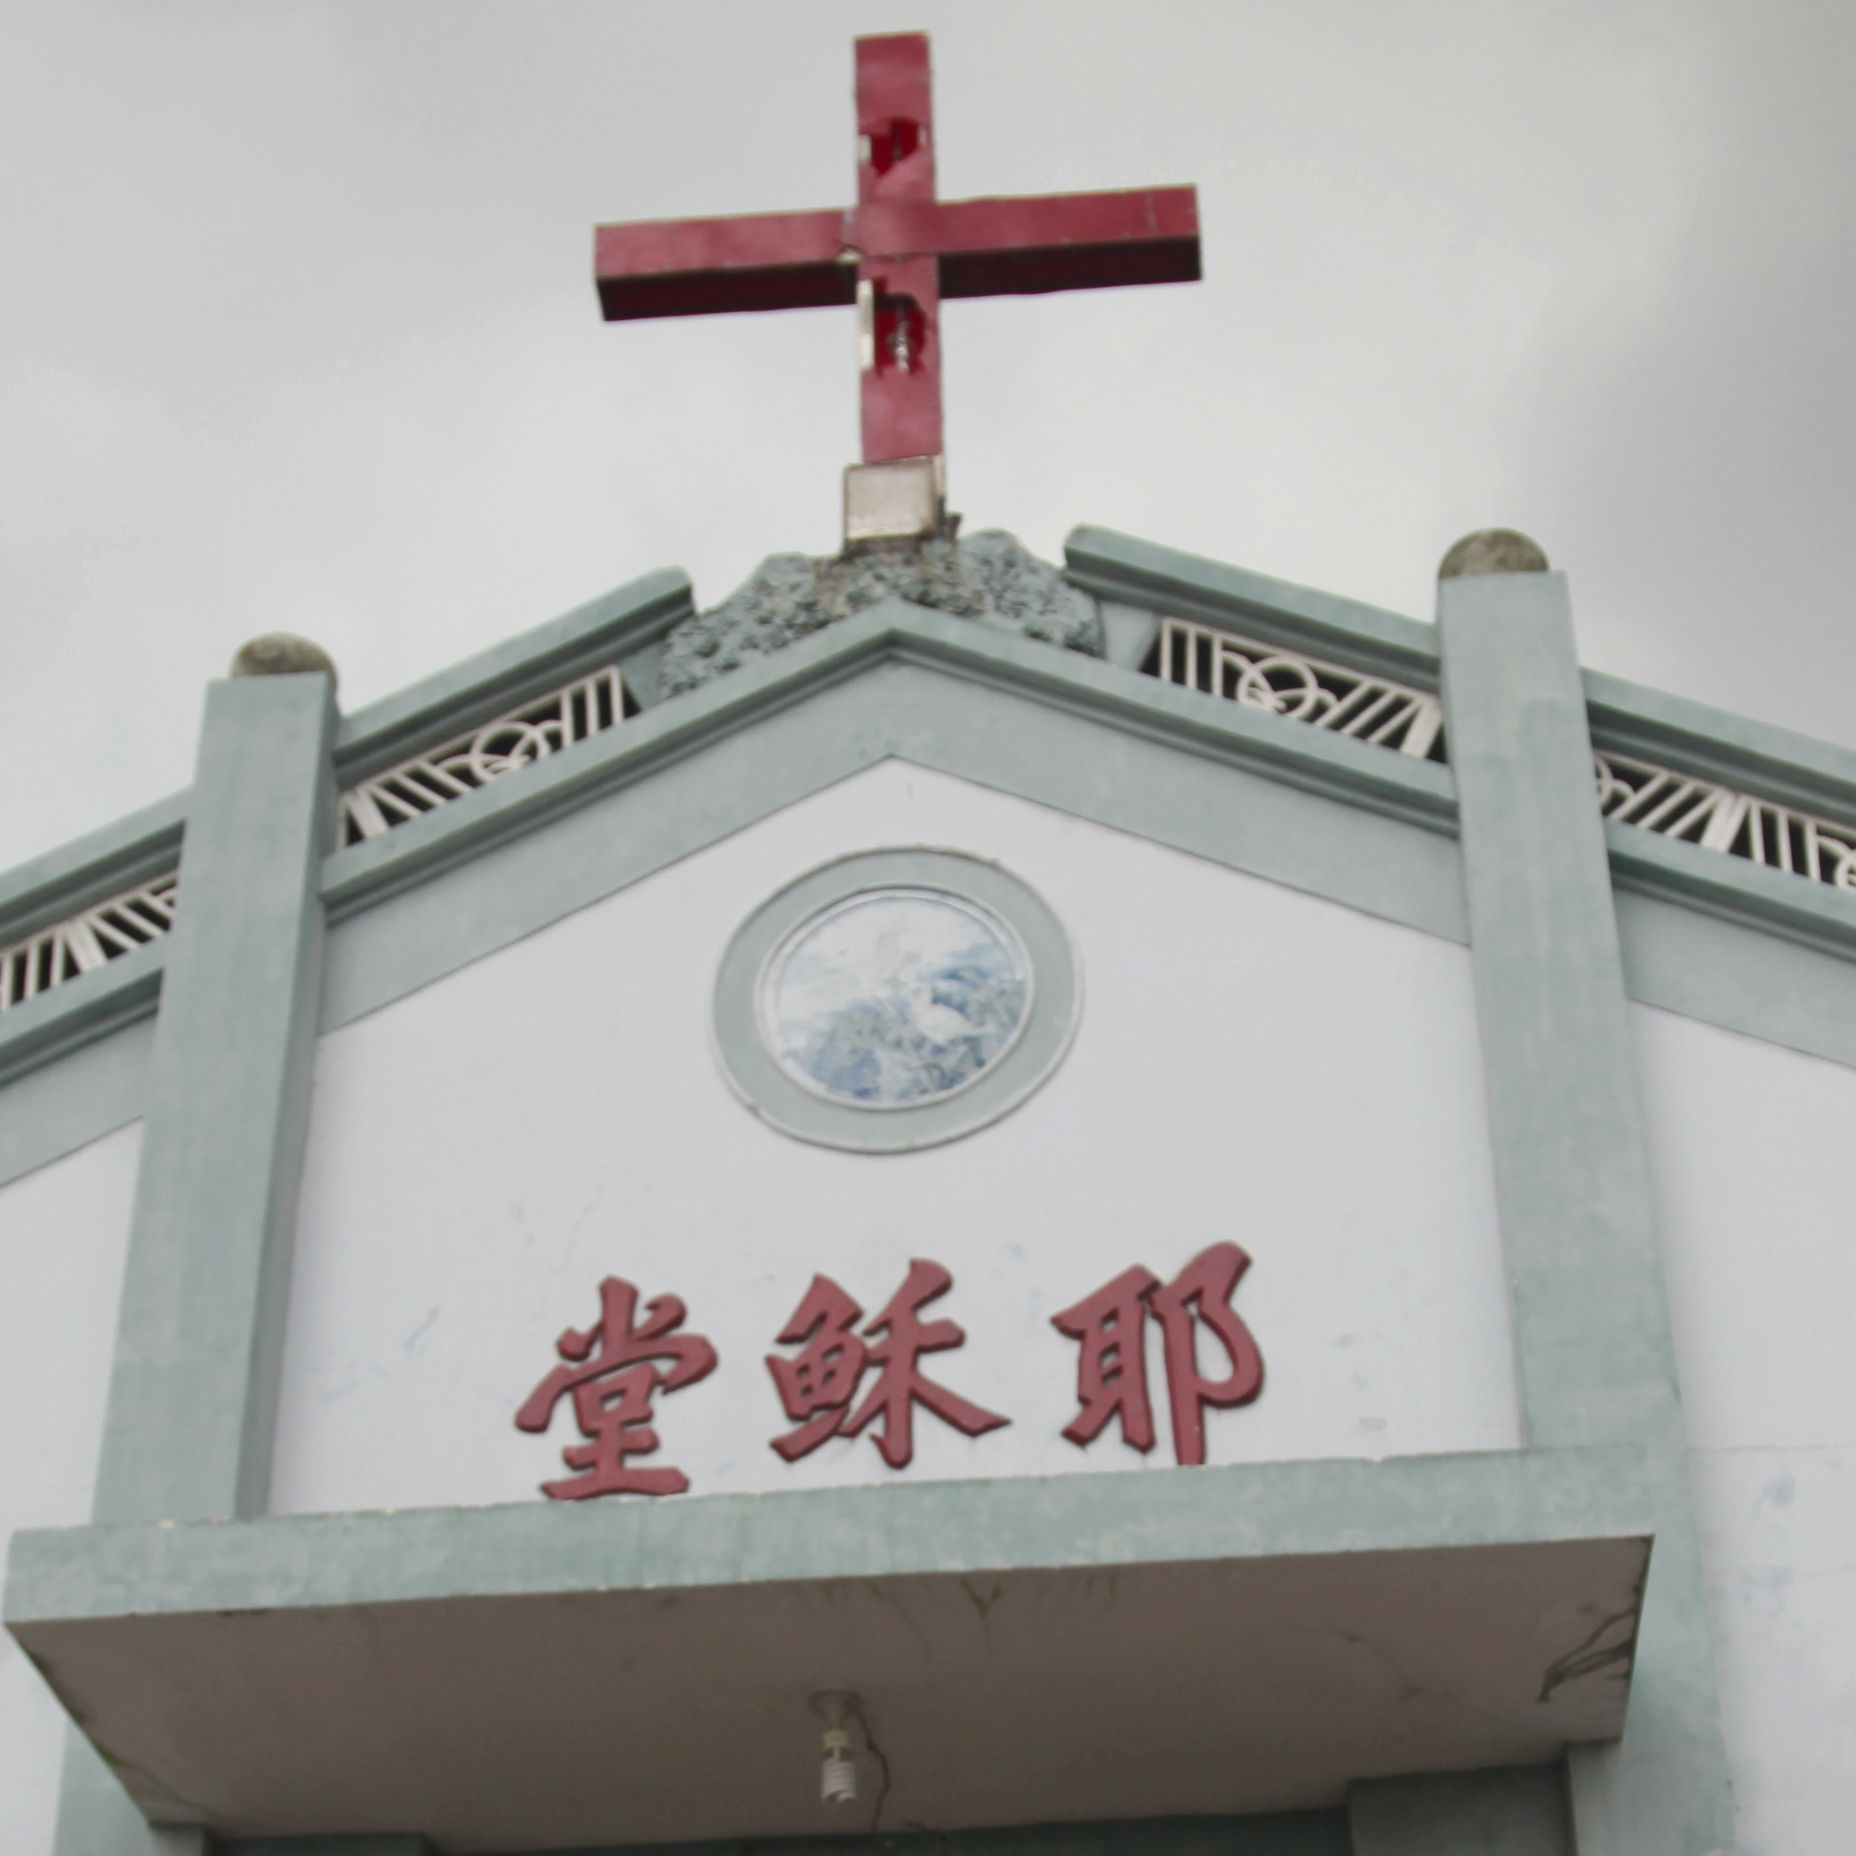 Underground priests removed in China for holding summer youth camp